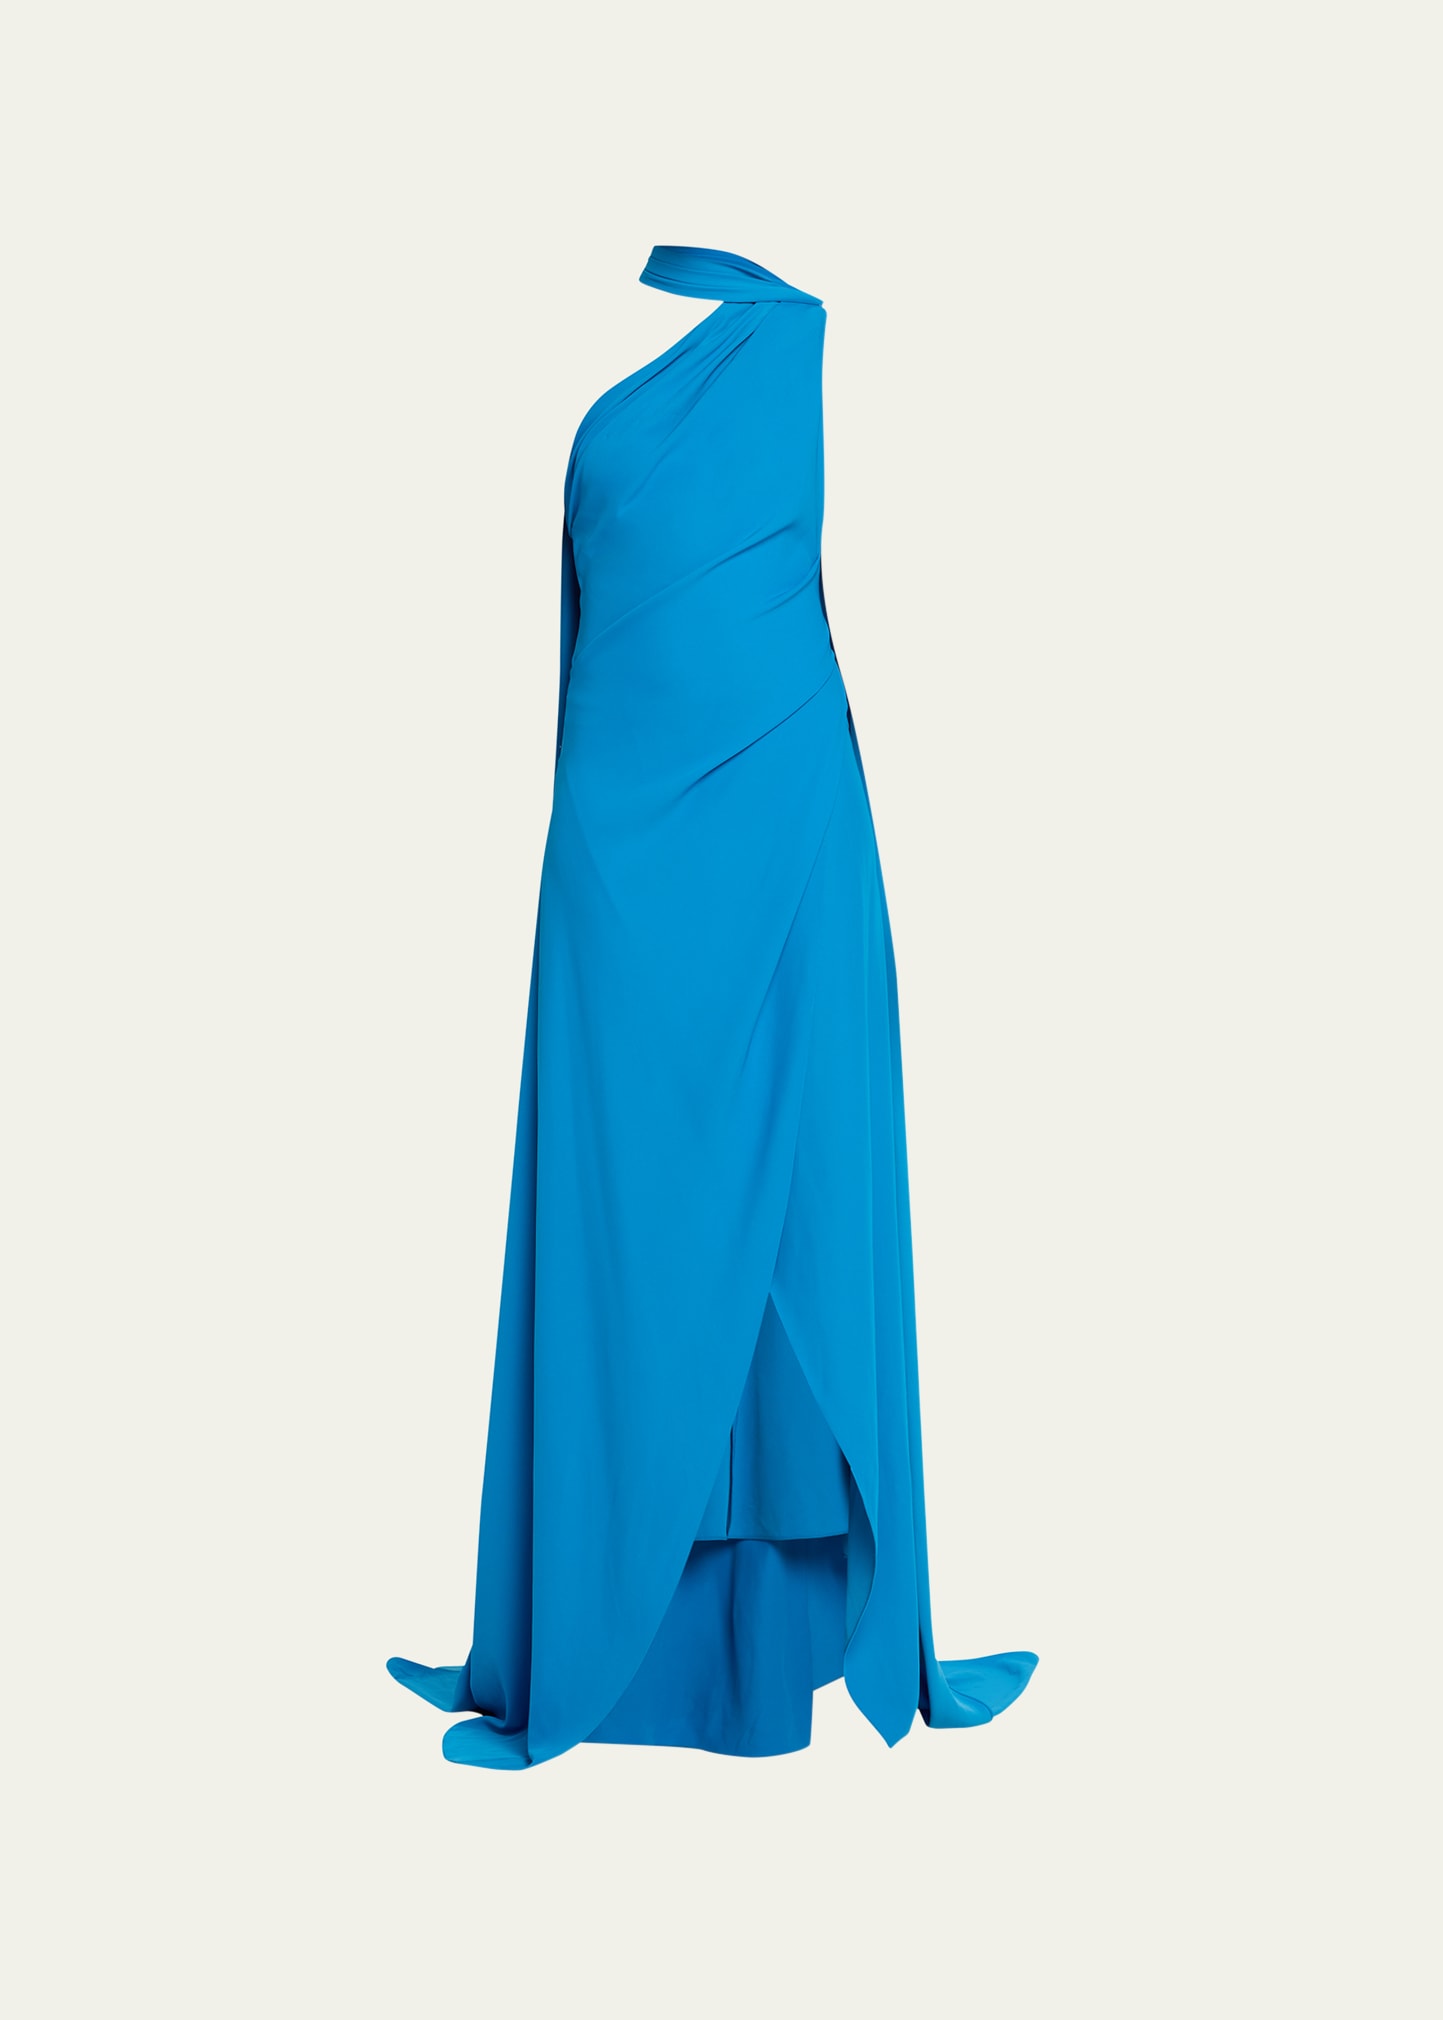 Atelier Prabal Gurung Claire Draped Cape Gown In Cobalt